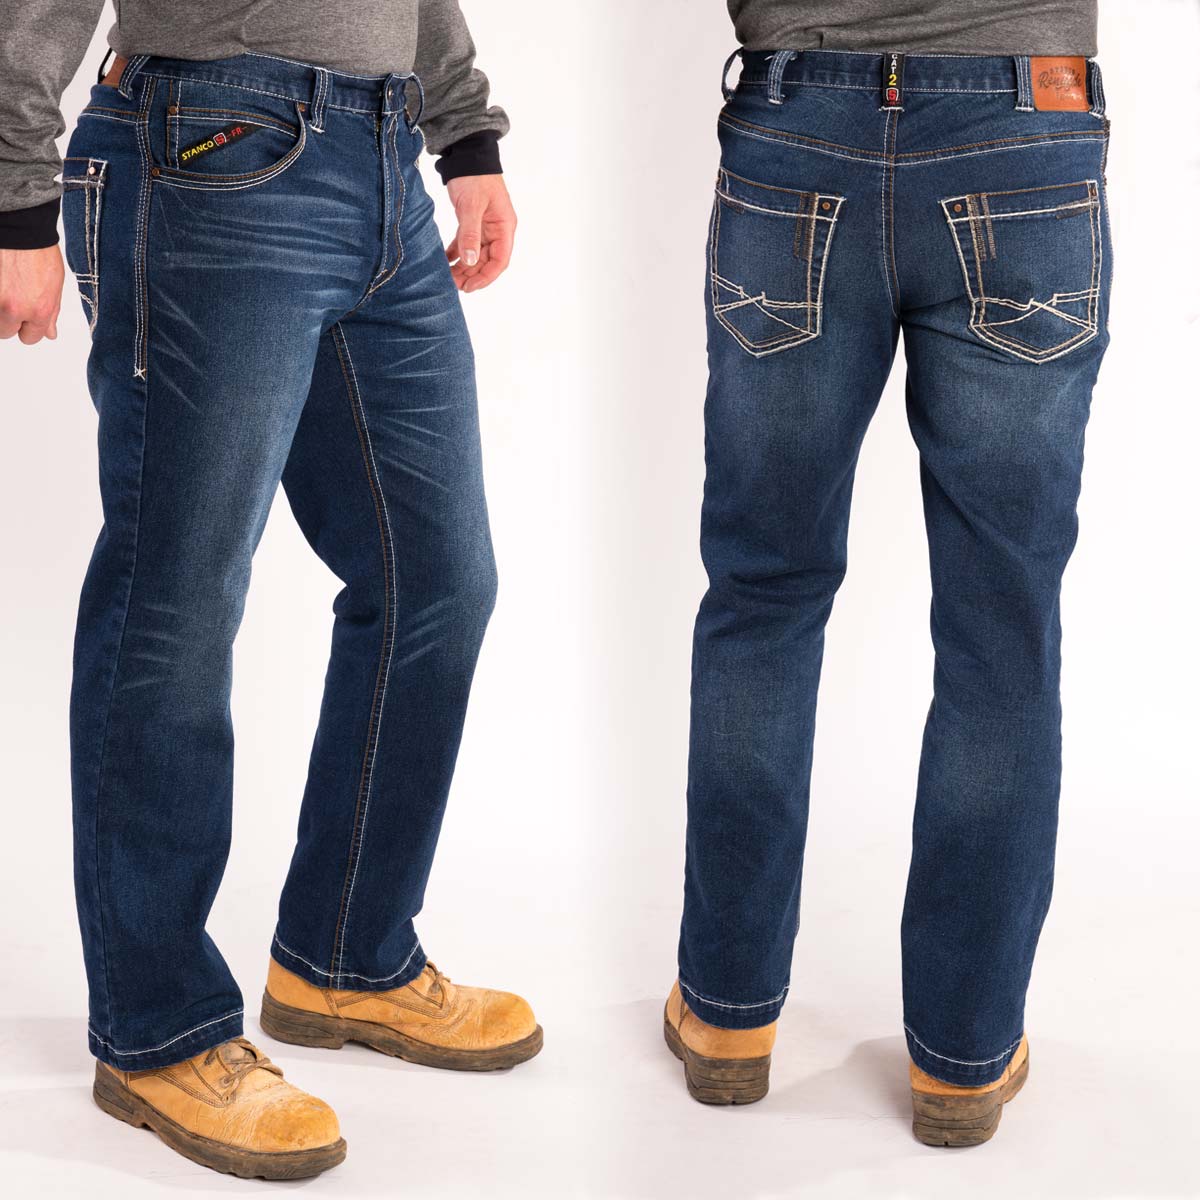 Renegade FR Jeans - side and back view